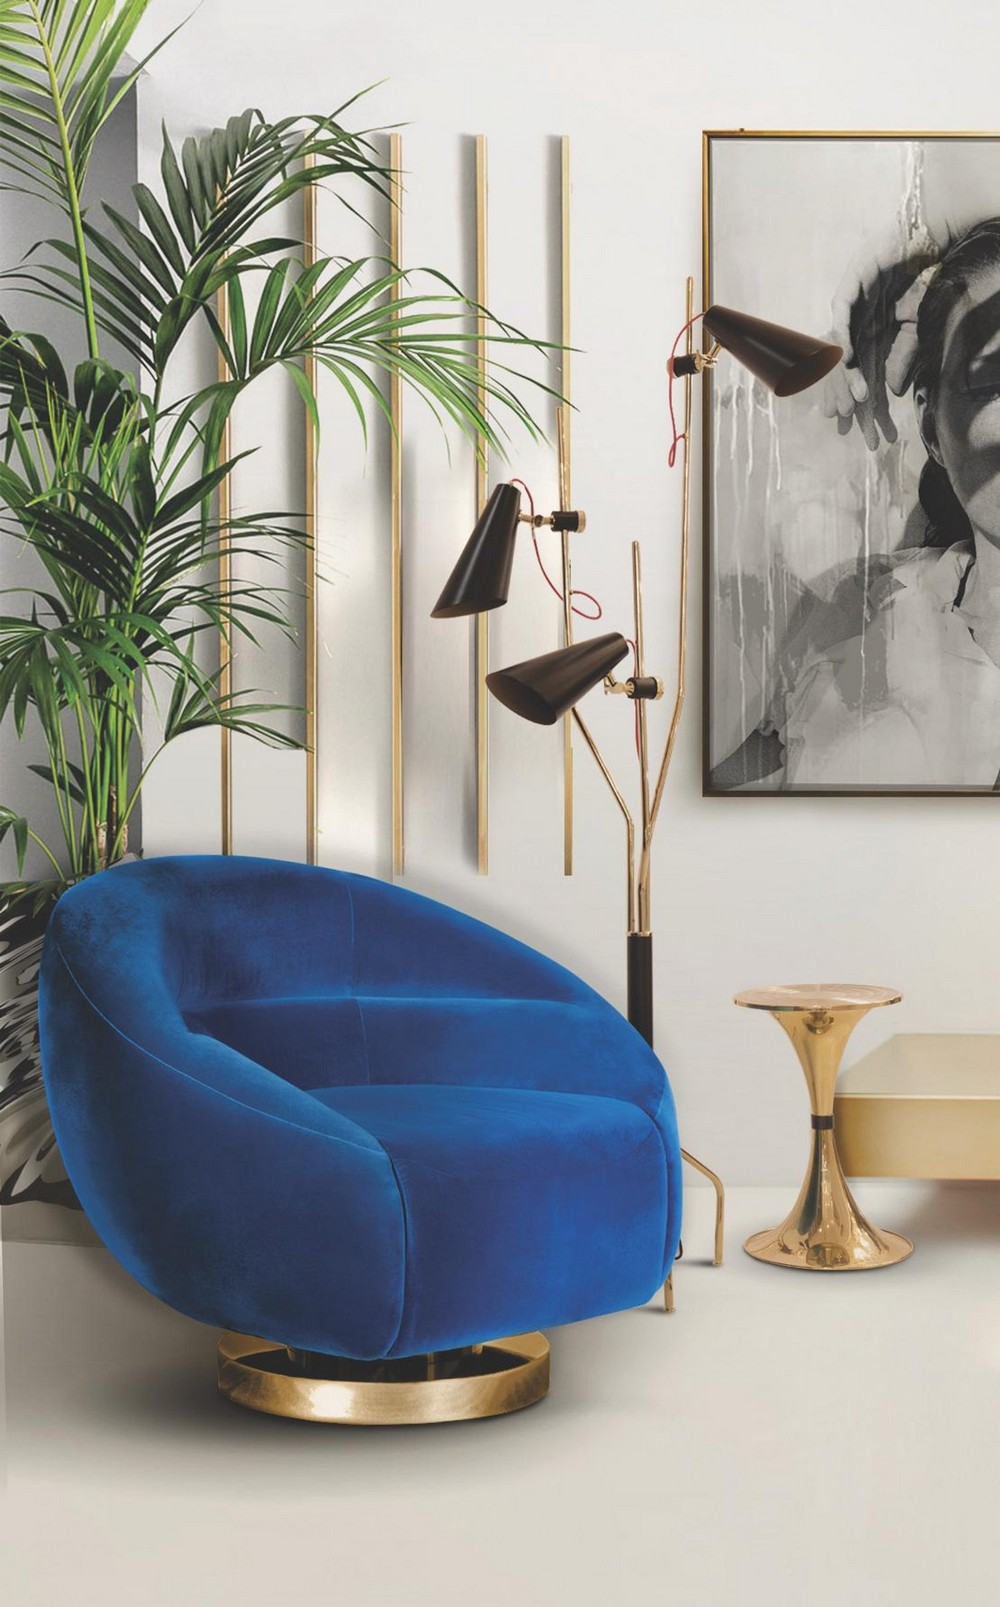 Pantone's Color of the Year: 5 Living Room Ideas in Classic Blue